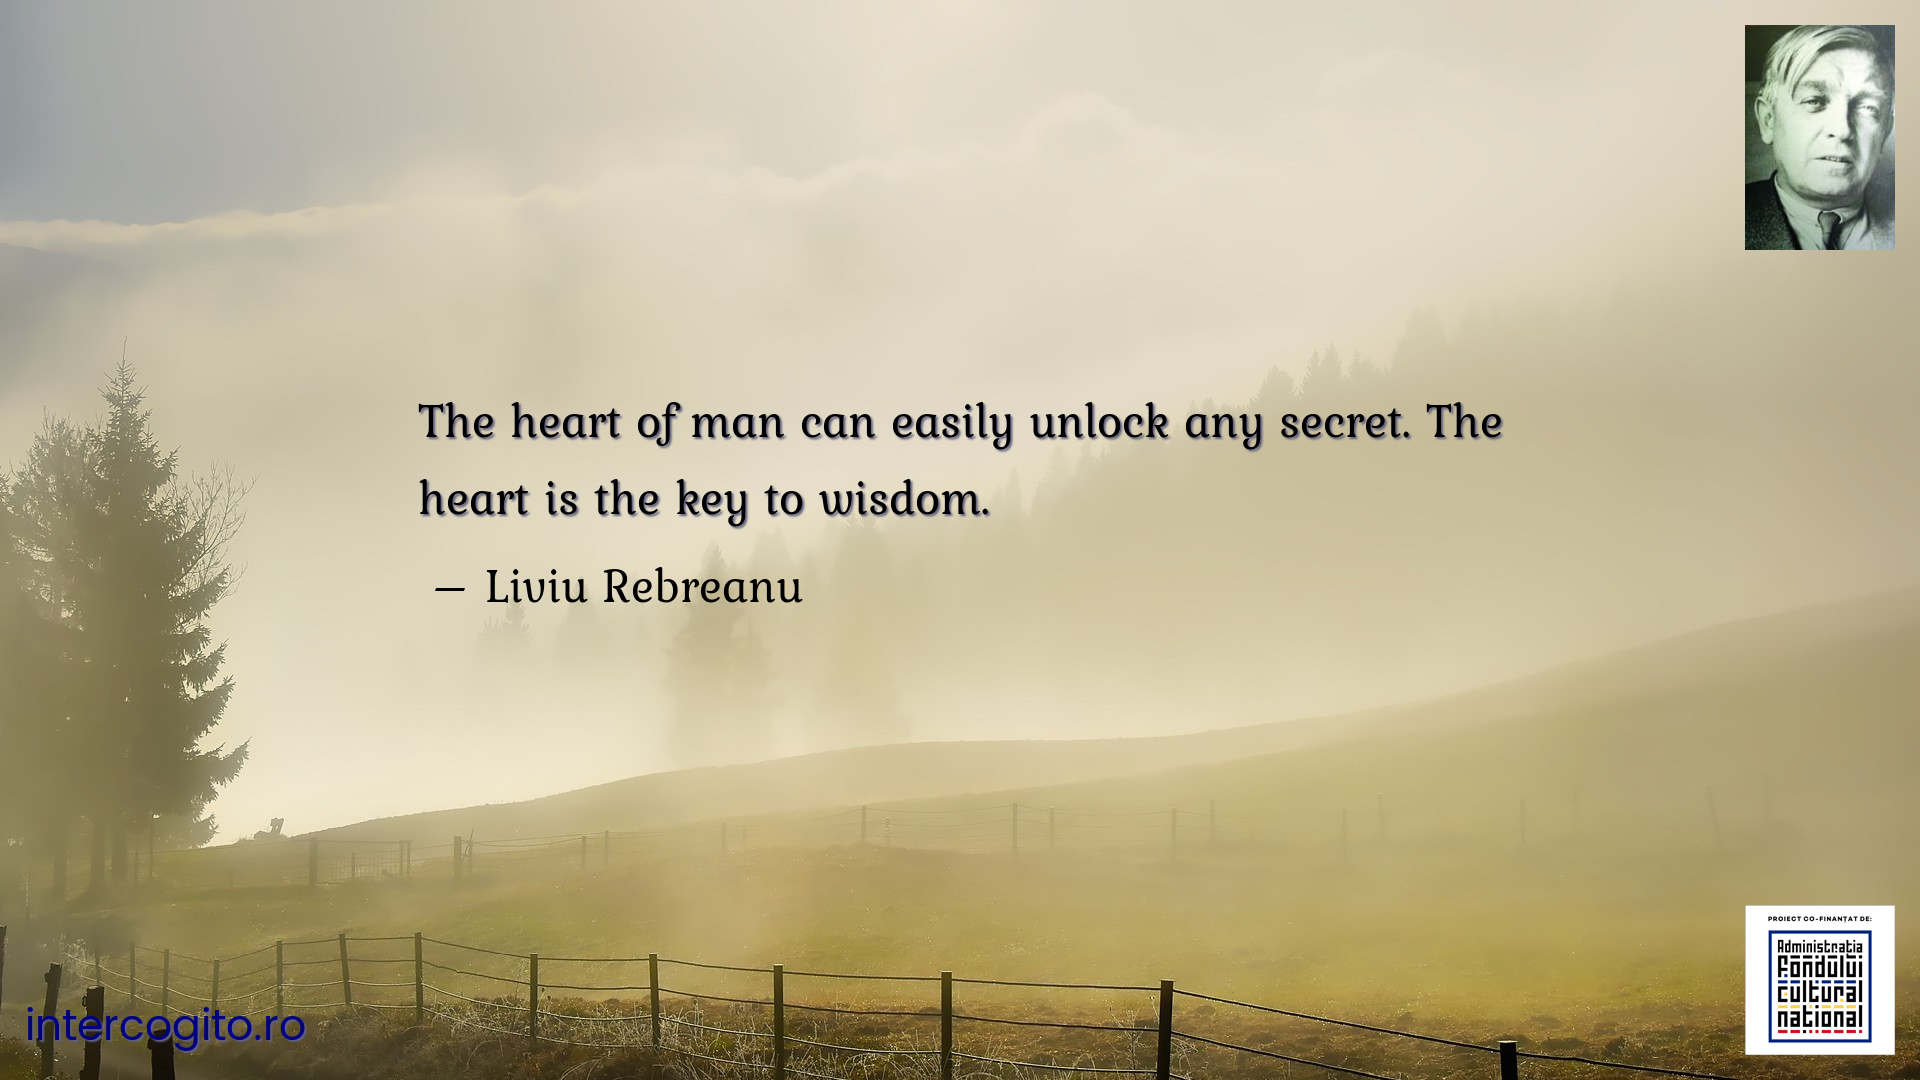 The heart of man can easily unlock any secret. The heart is the key to wisdom.